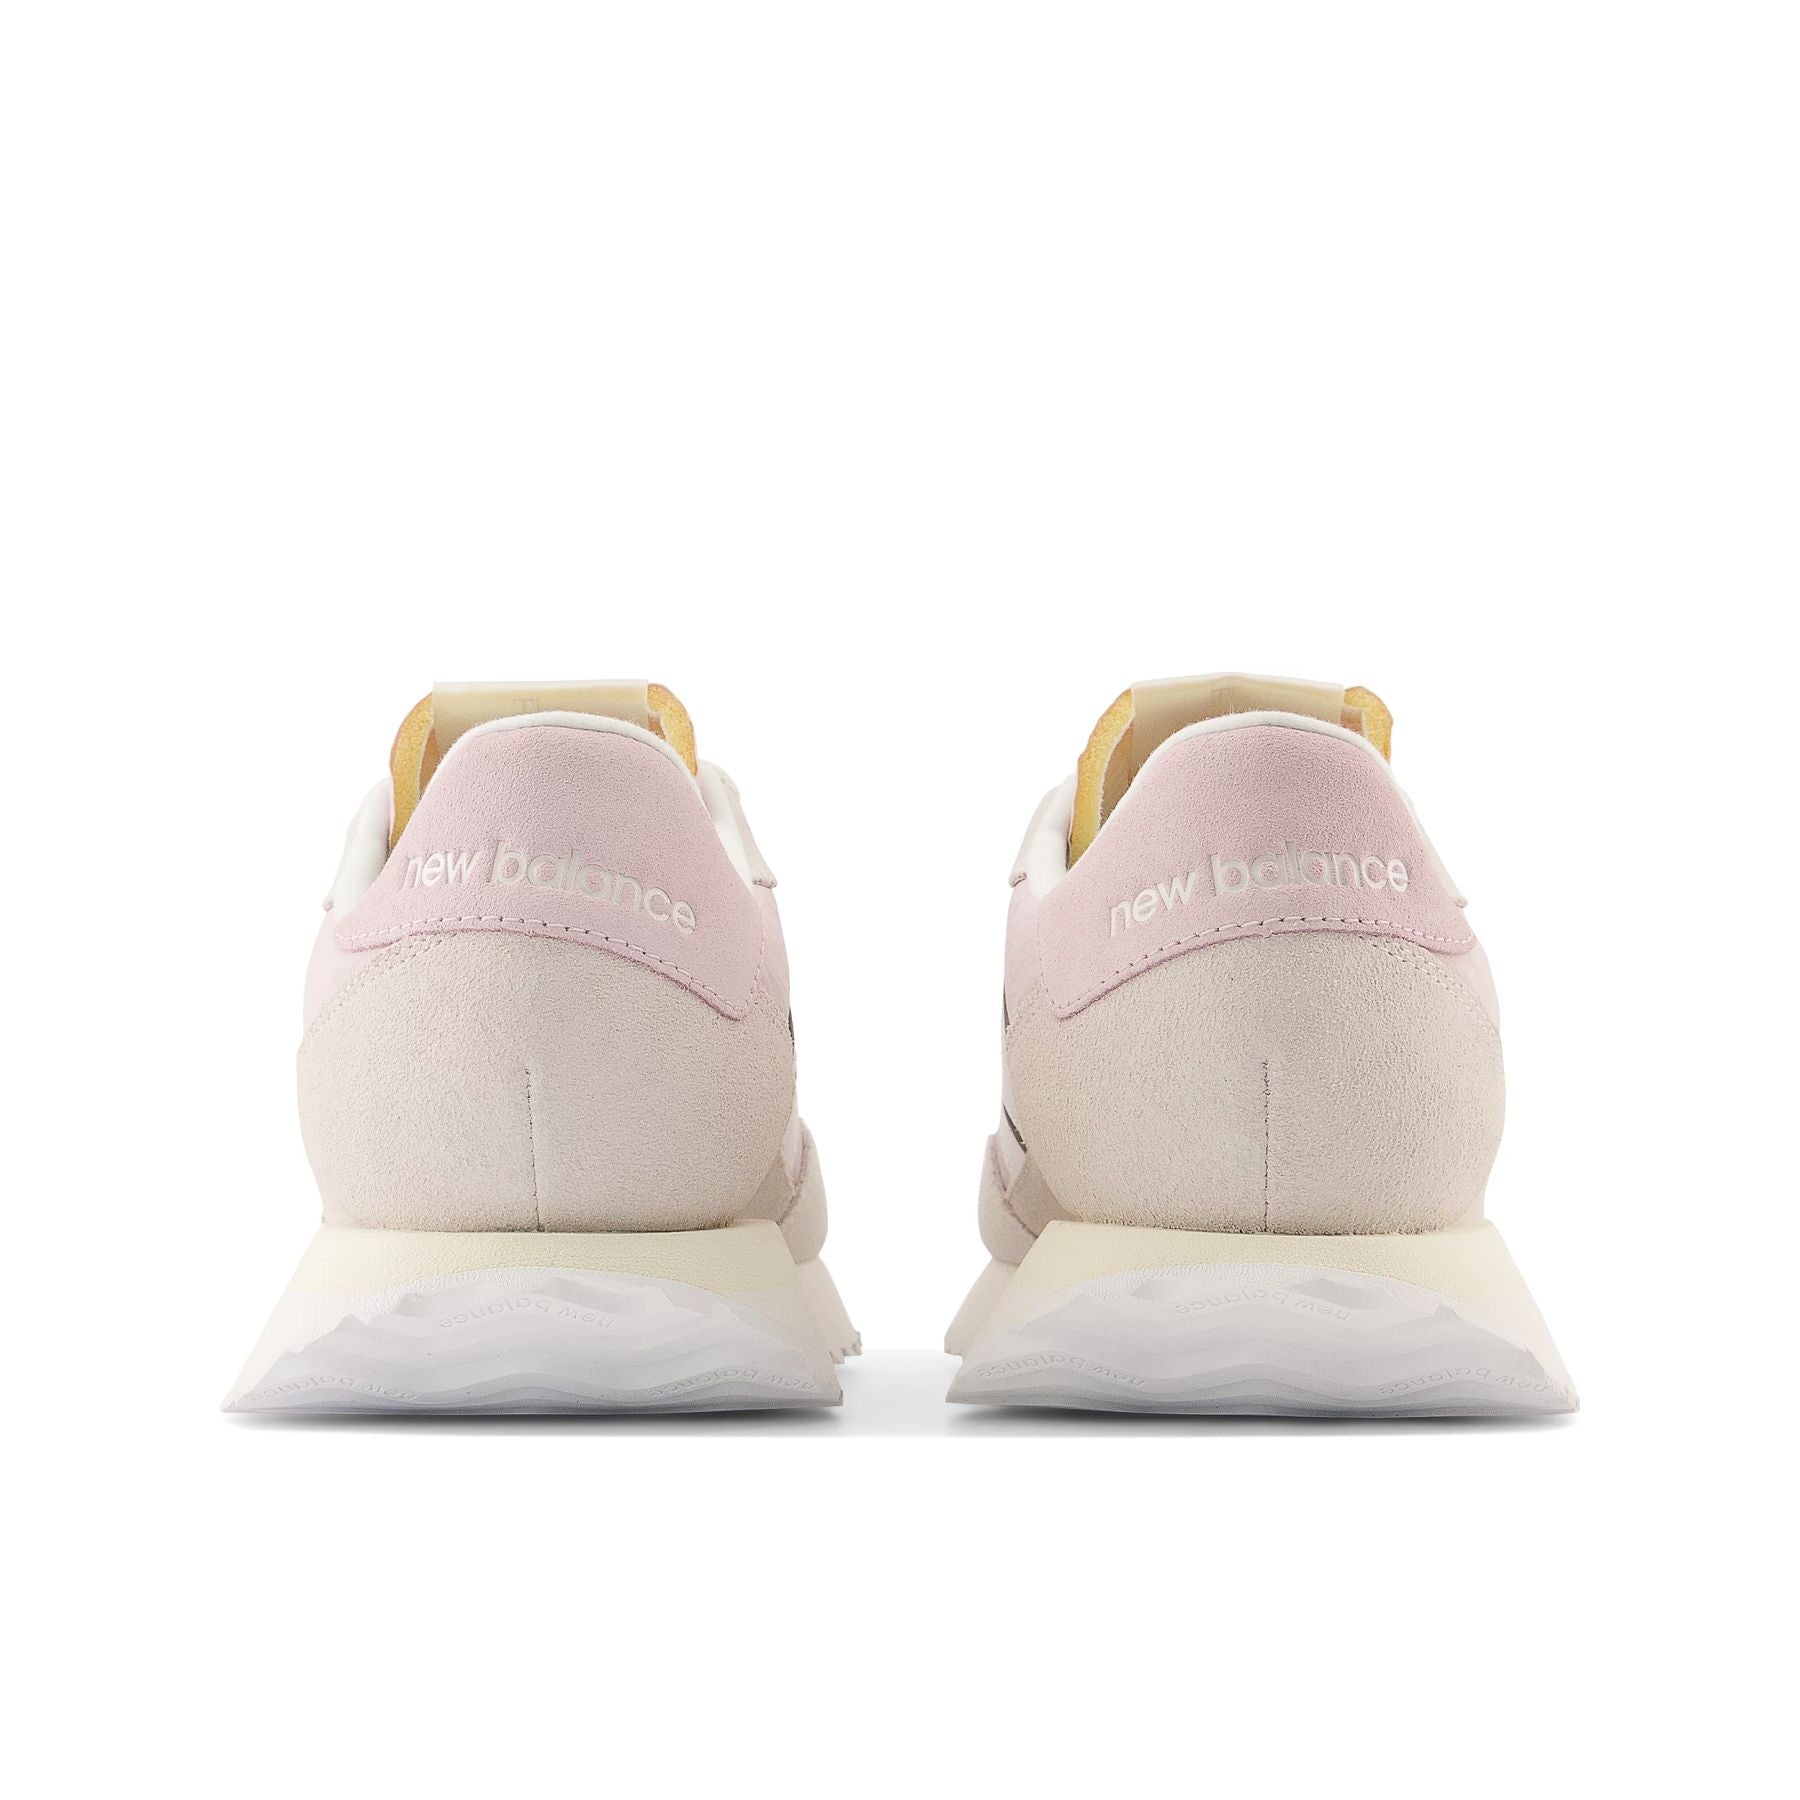 Back view of the Women's New Balance lifestyle 237 shoe in white